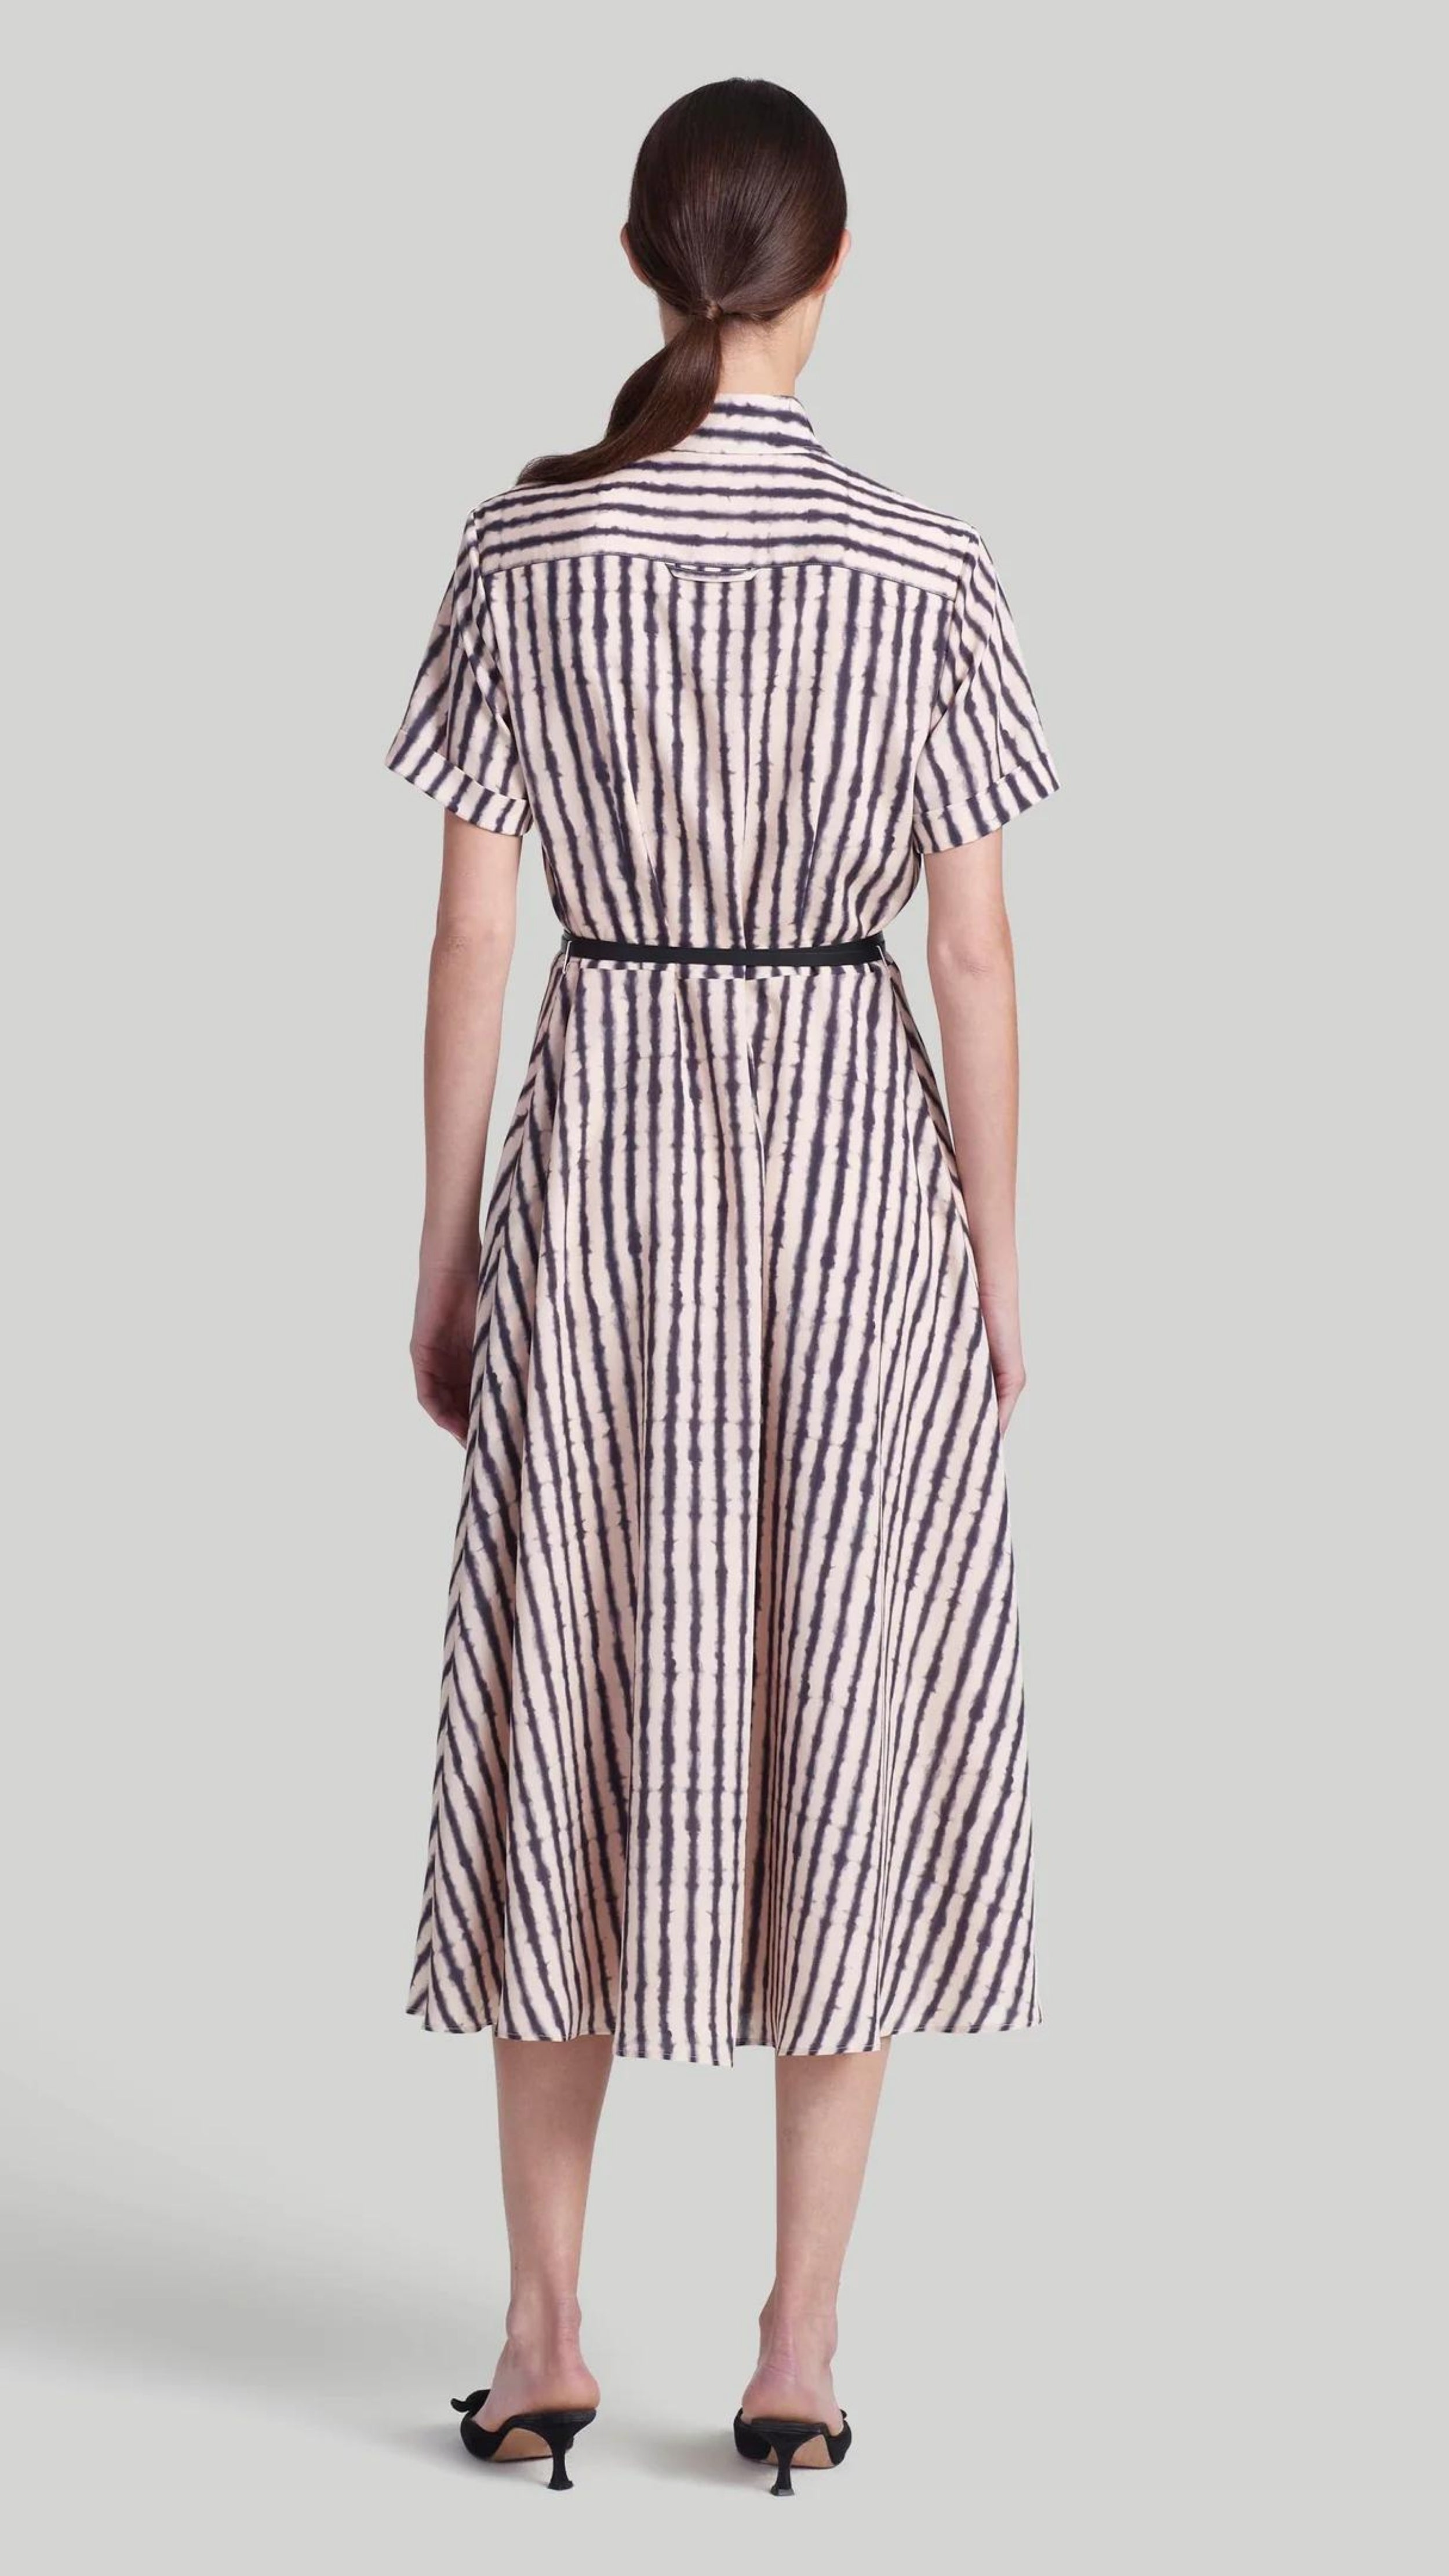 Altuzarra Kiera Dress The &#39;Kiera&#39; dress is designed with a small point collar, short sleeves and a flattering A-line skirt. It is detailed with a slim leather waist belt and features a black and white stripe pattern and a front breast pocket. Shown on model facing back.